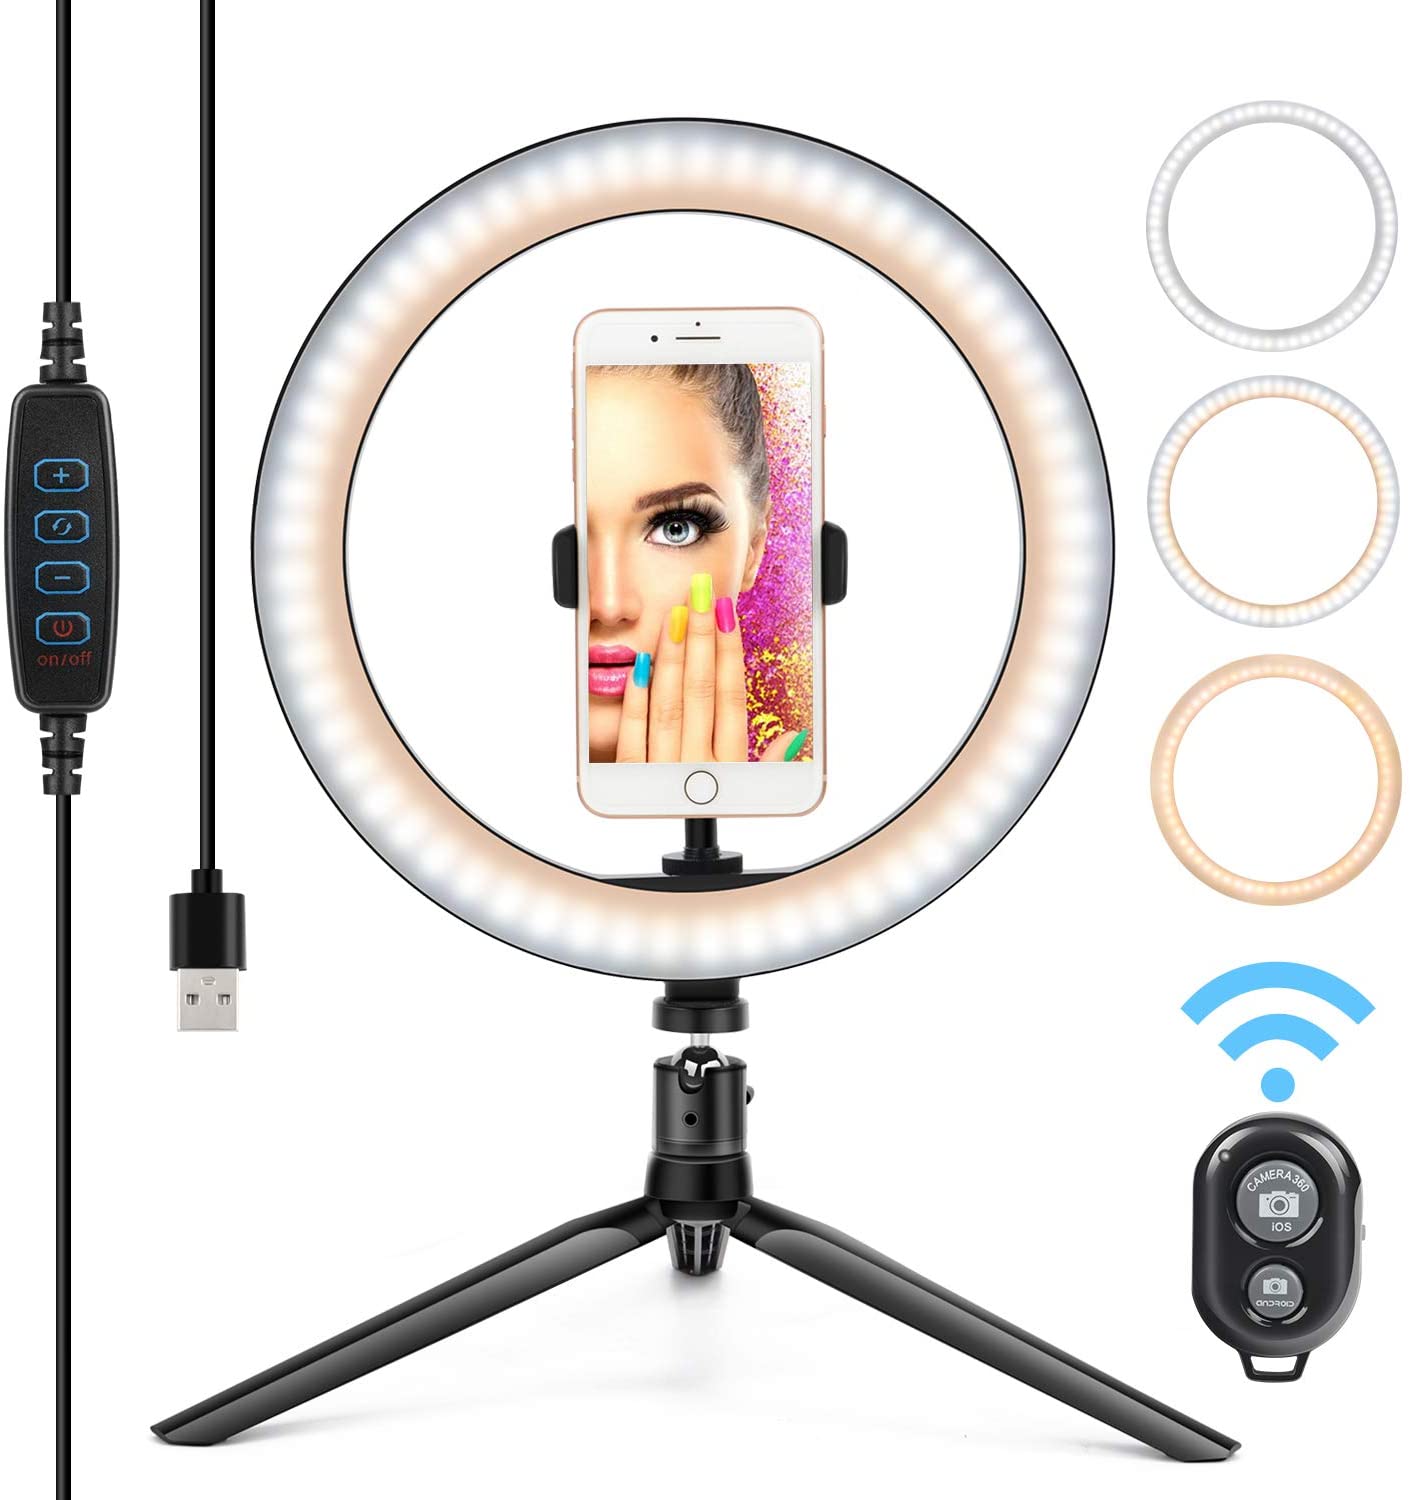 Selfie Ring Light for iPhone Android 3 Light Modes /& 10 Brightness Level YouTube Video Live Stream Makeup Photography LED Ring Light 10 with Tripod Stand /& Phone Holder